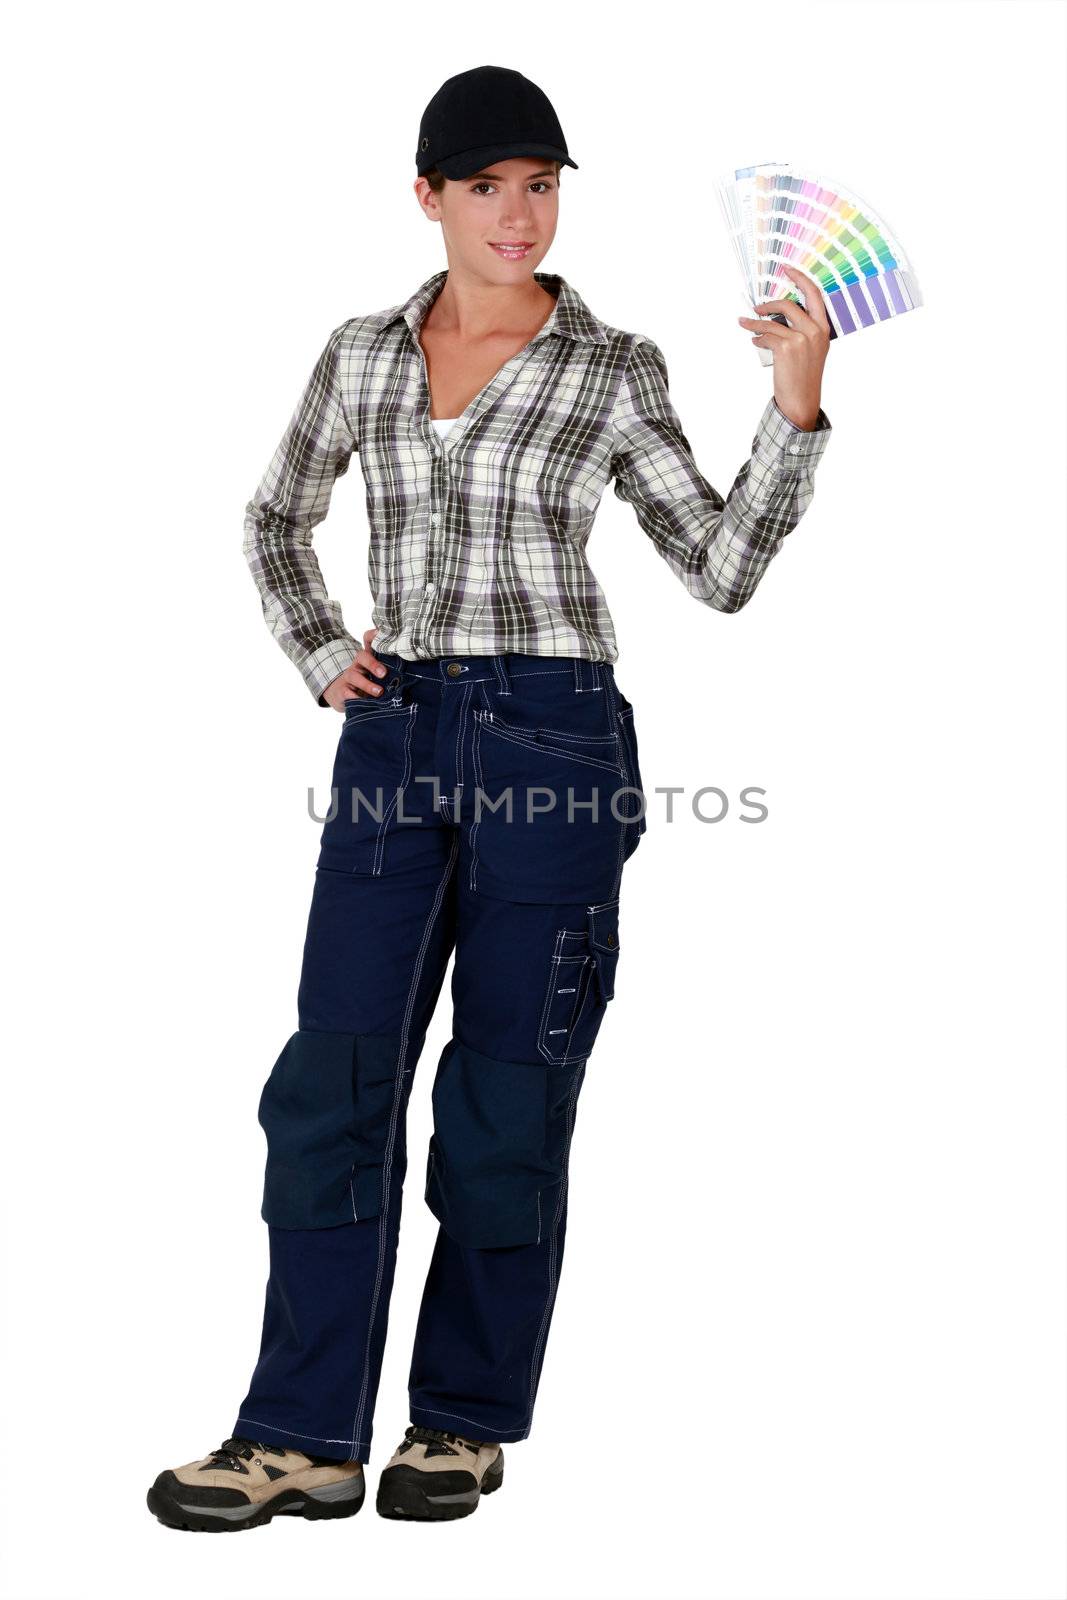 Woman with color charts